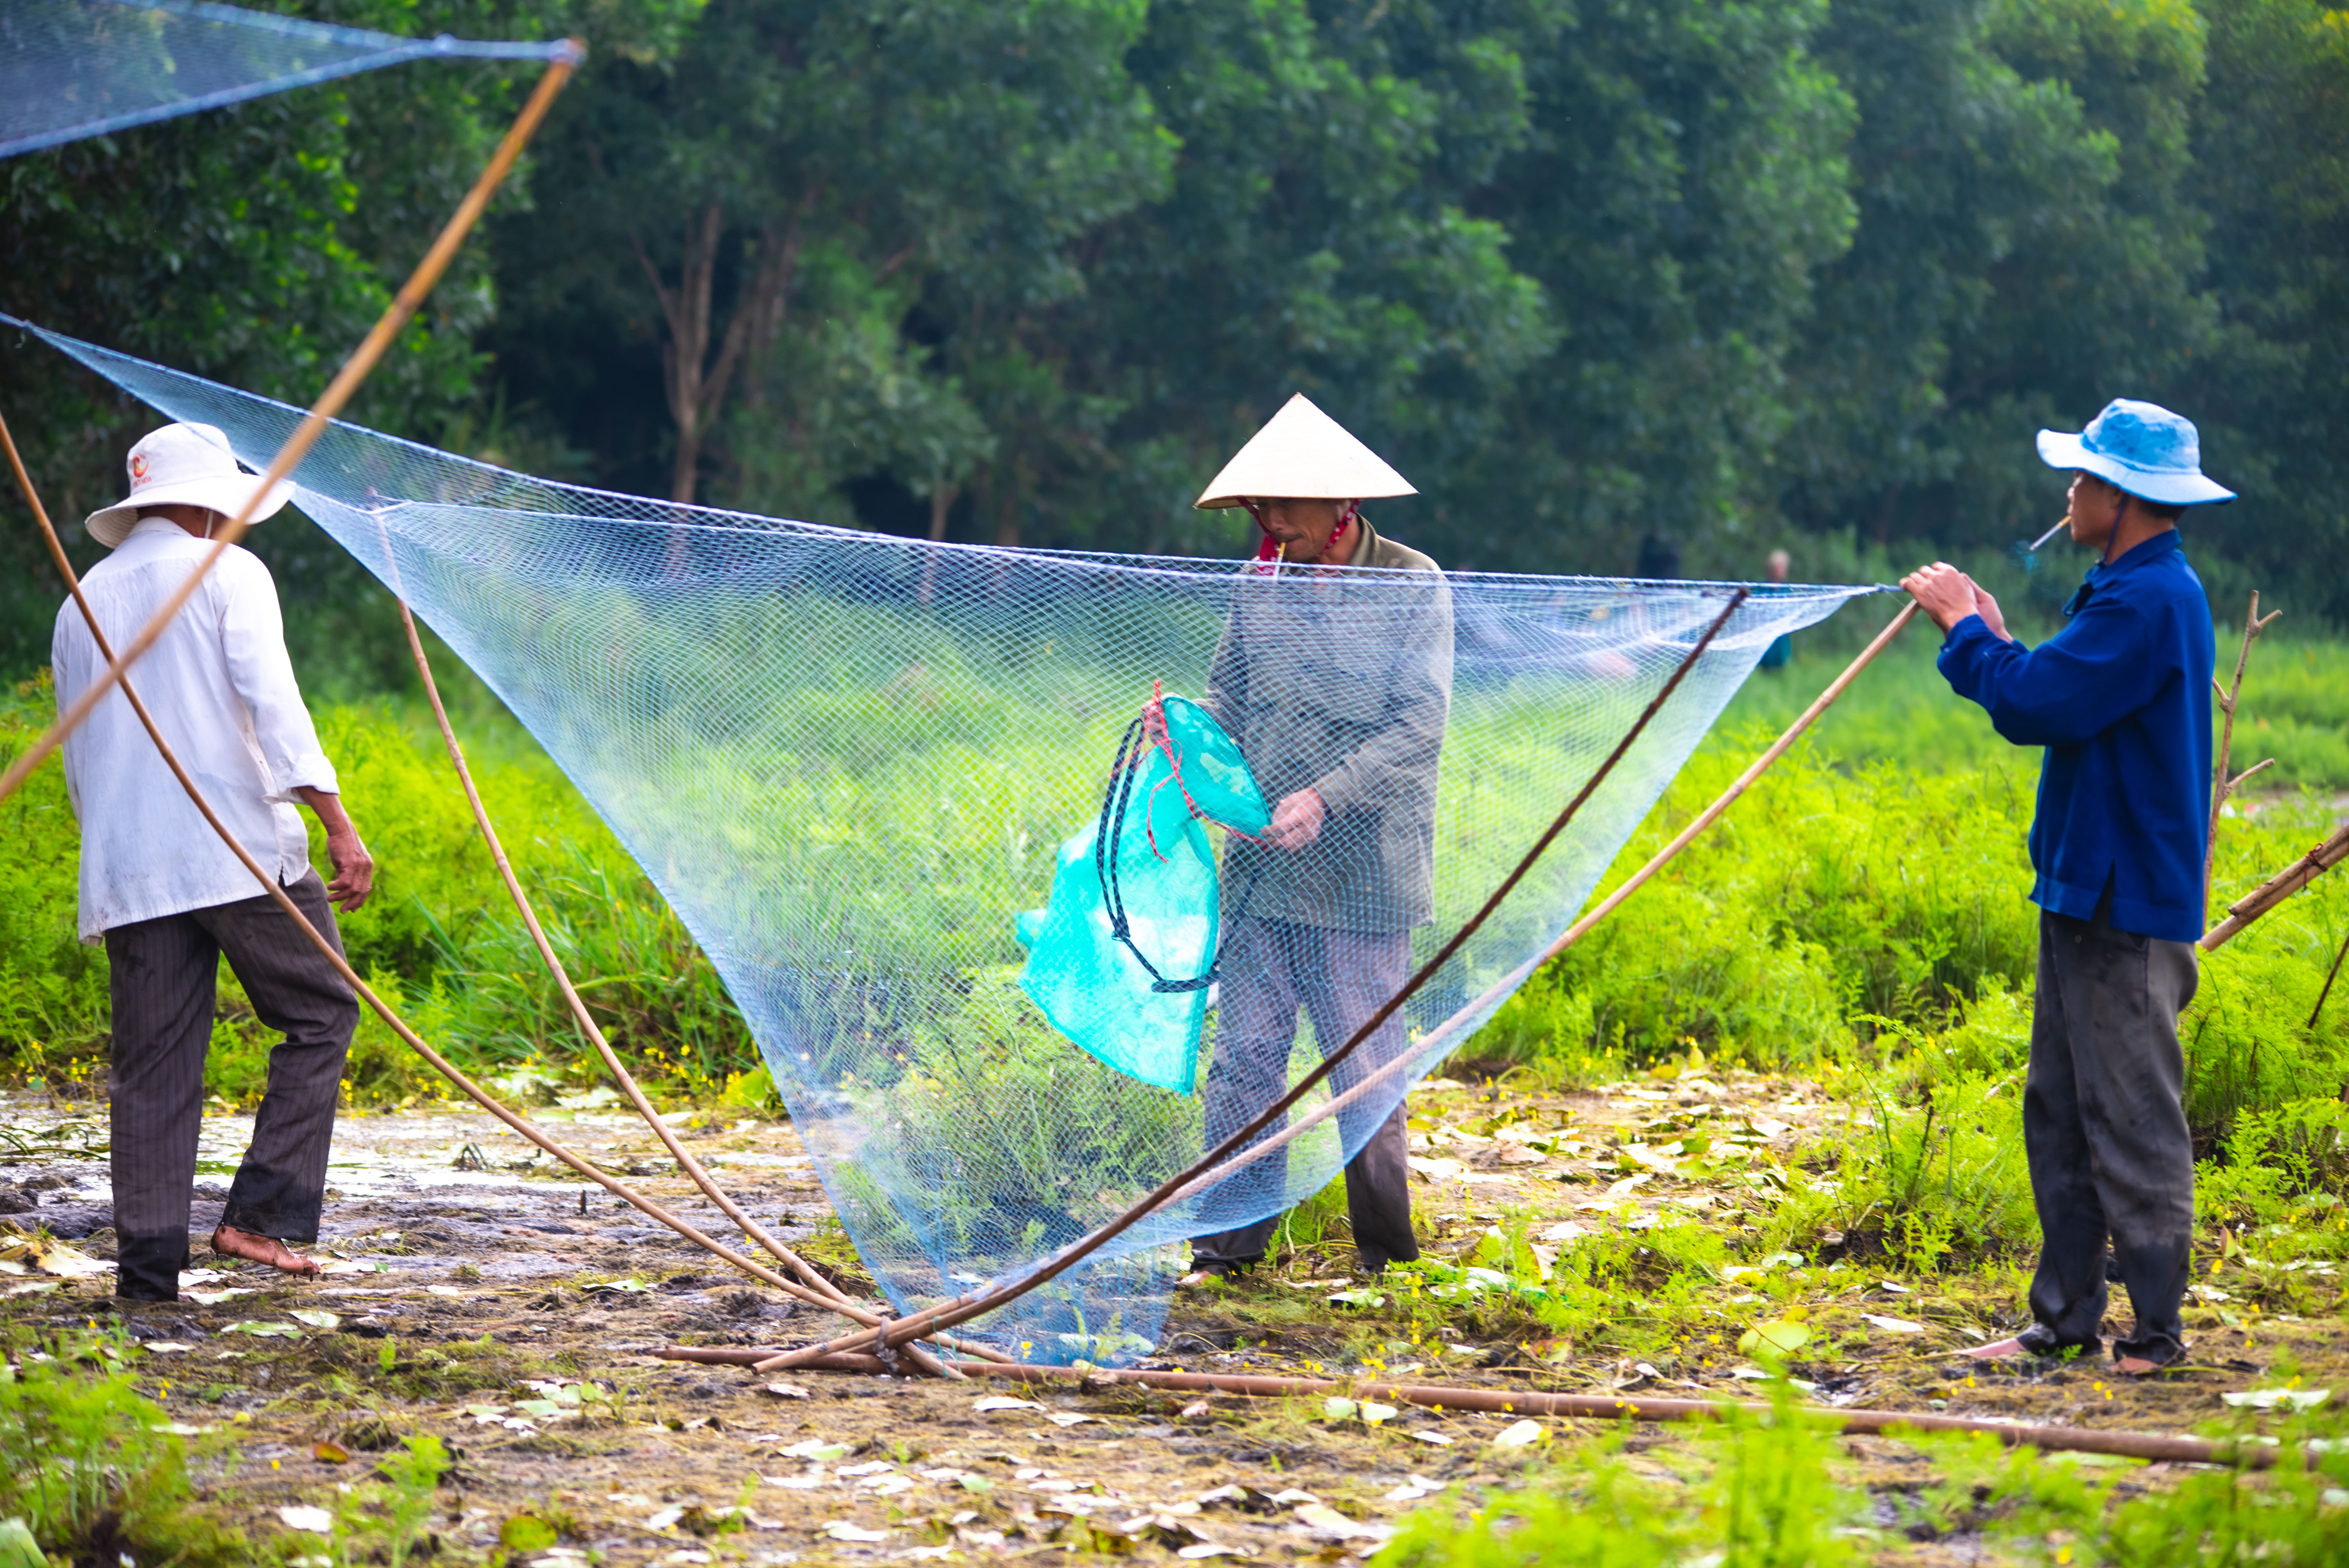 Farmers are seen preparing fishing tools to catch fish after the signal of 3 drums.